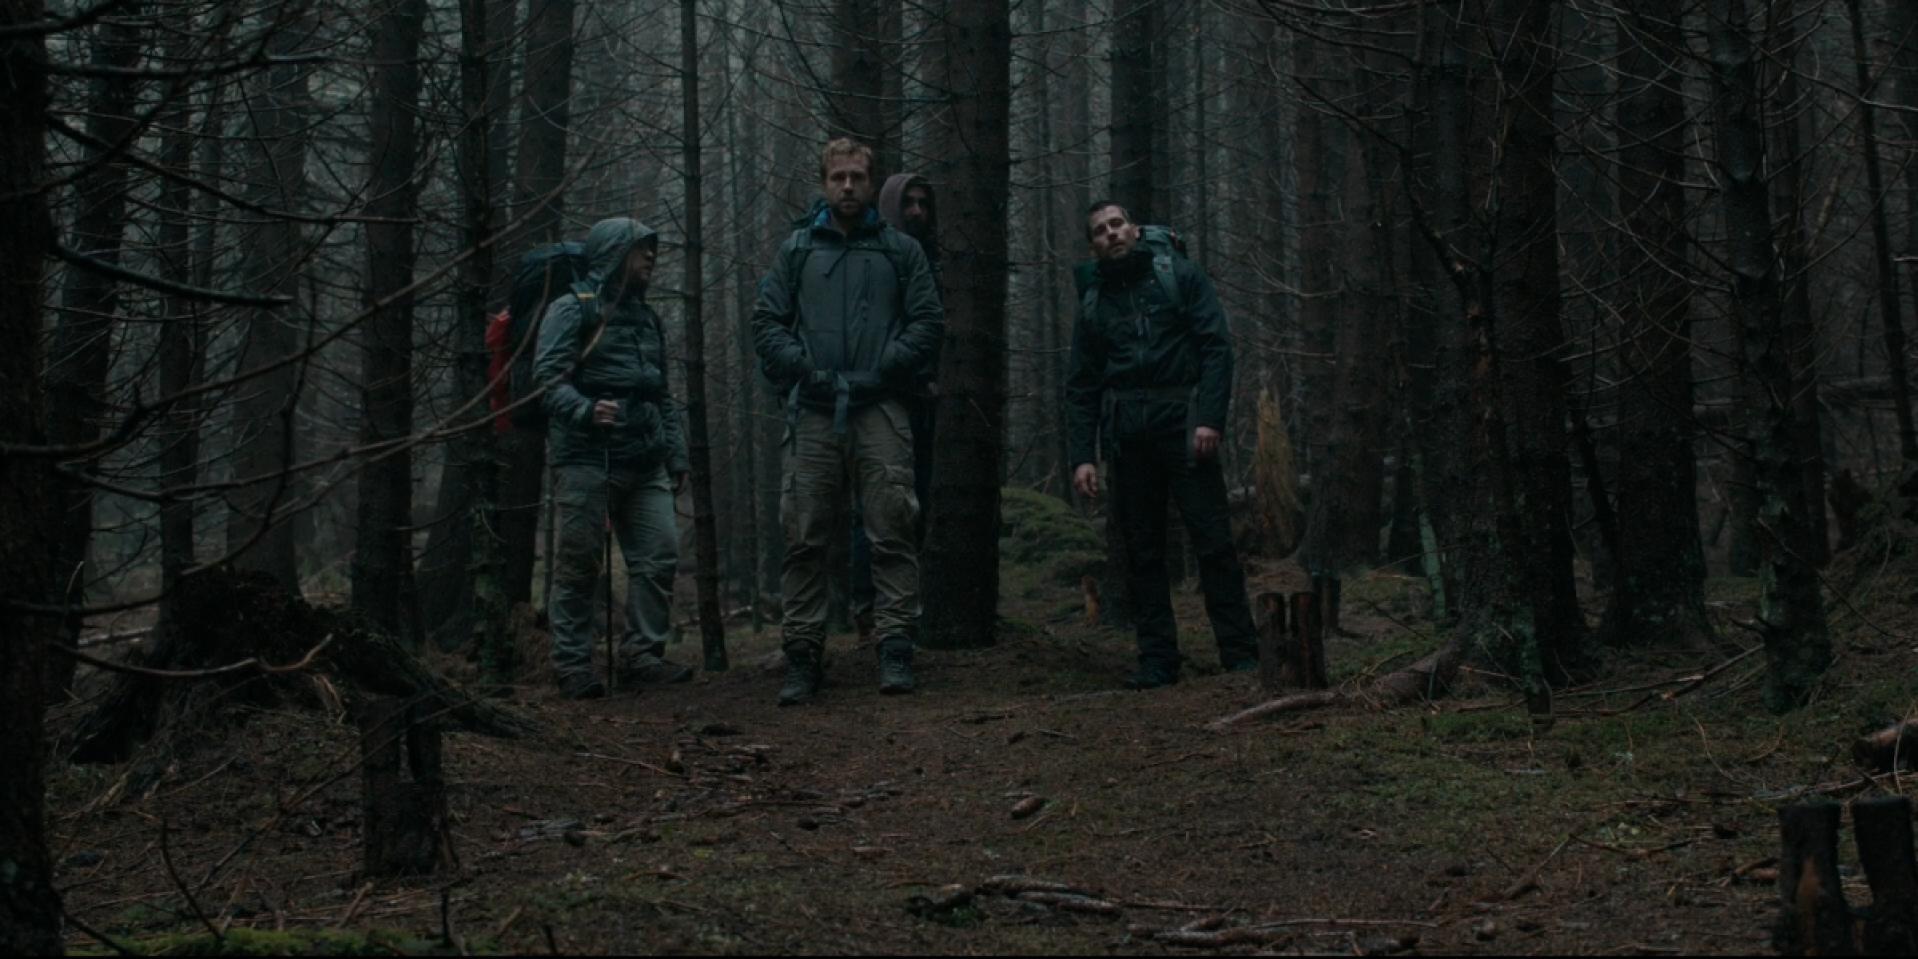 The friends standing in the woods in The Ritual